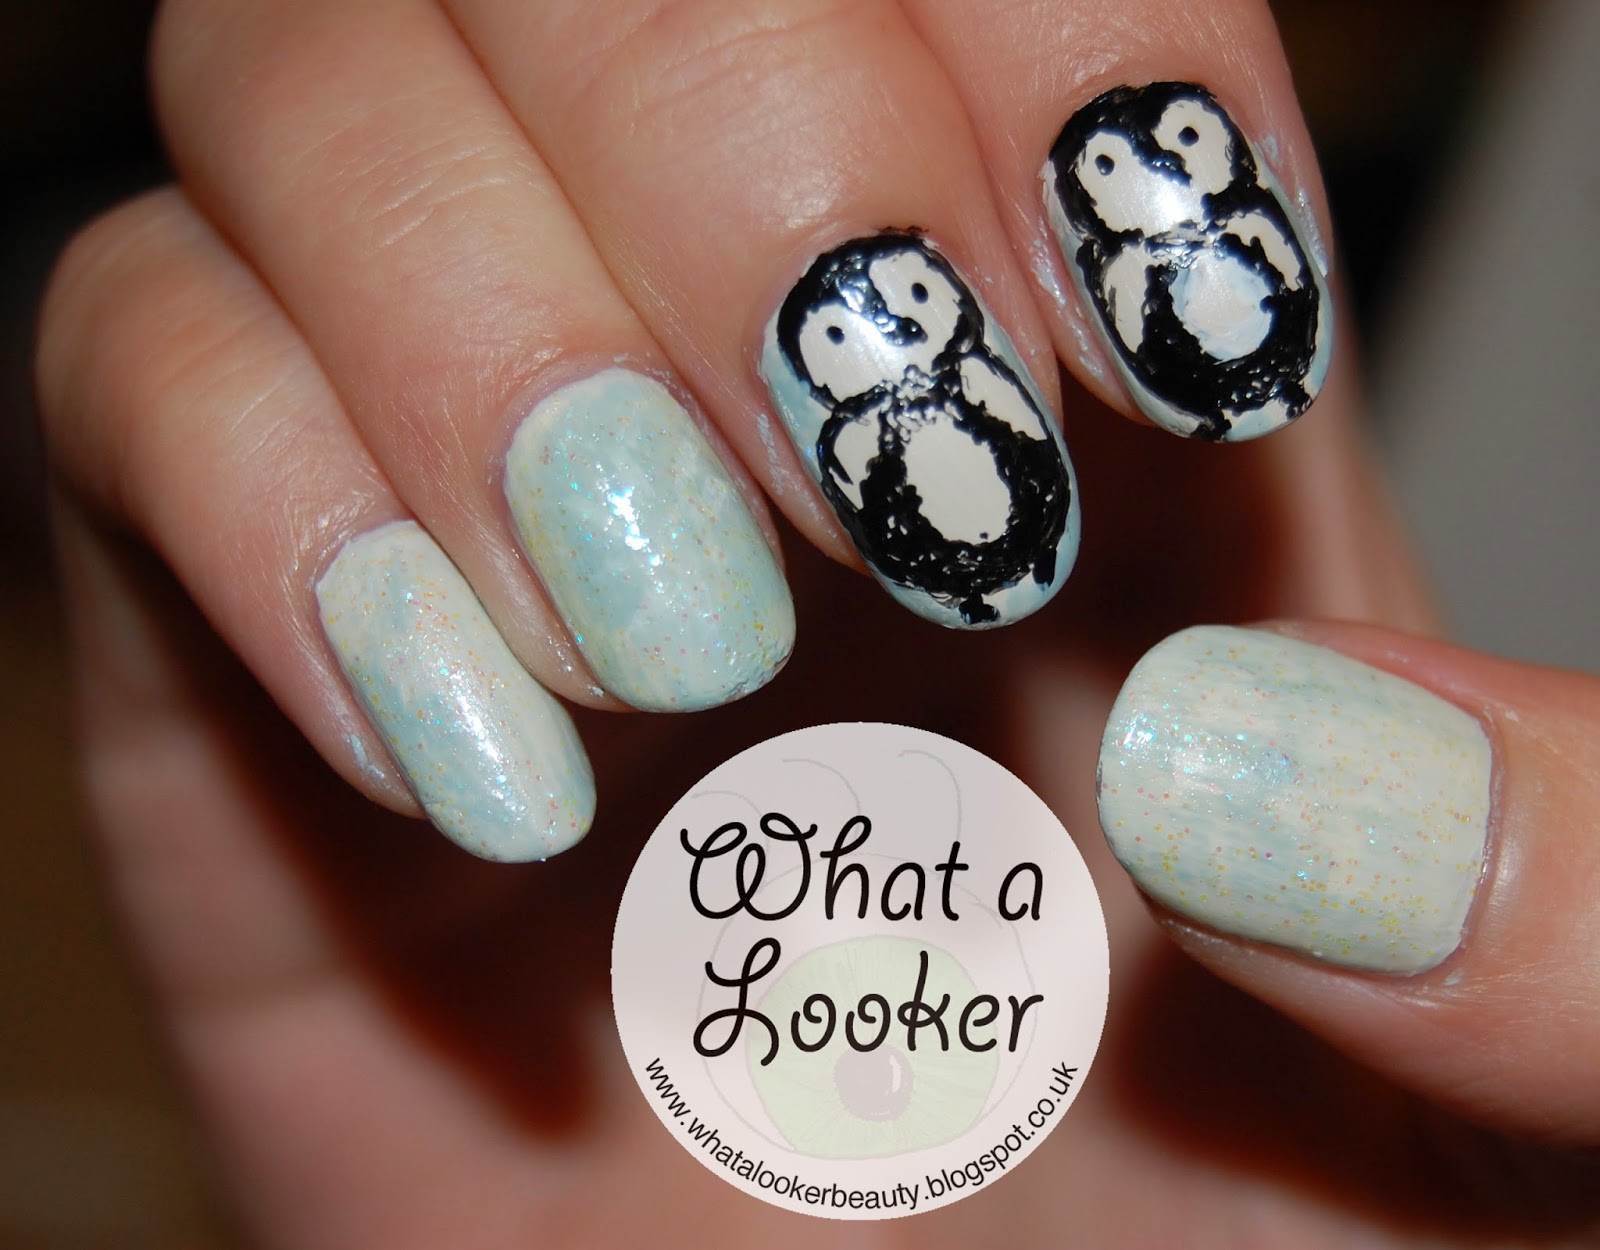 December Nail Art Challenge Themes - wide 5